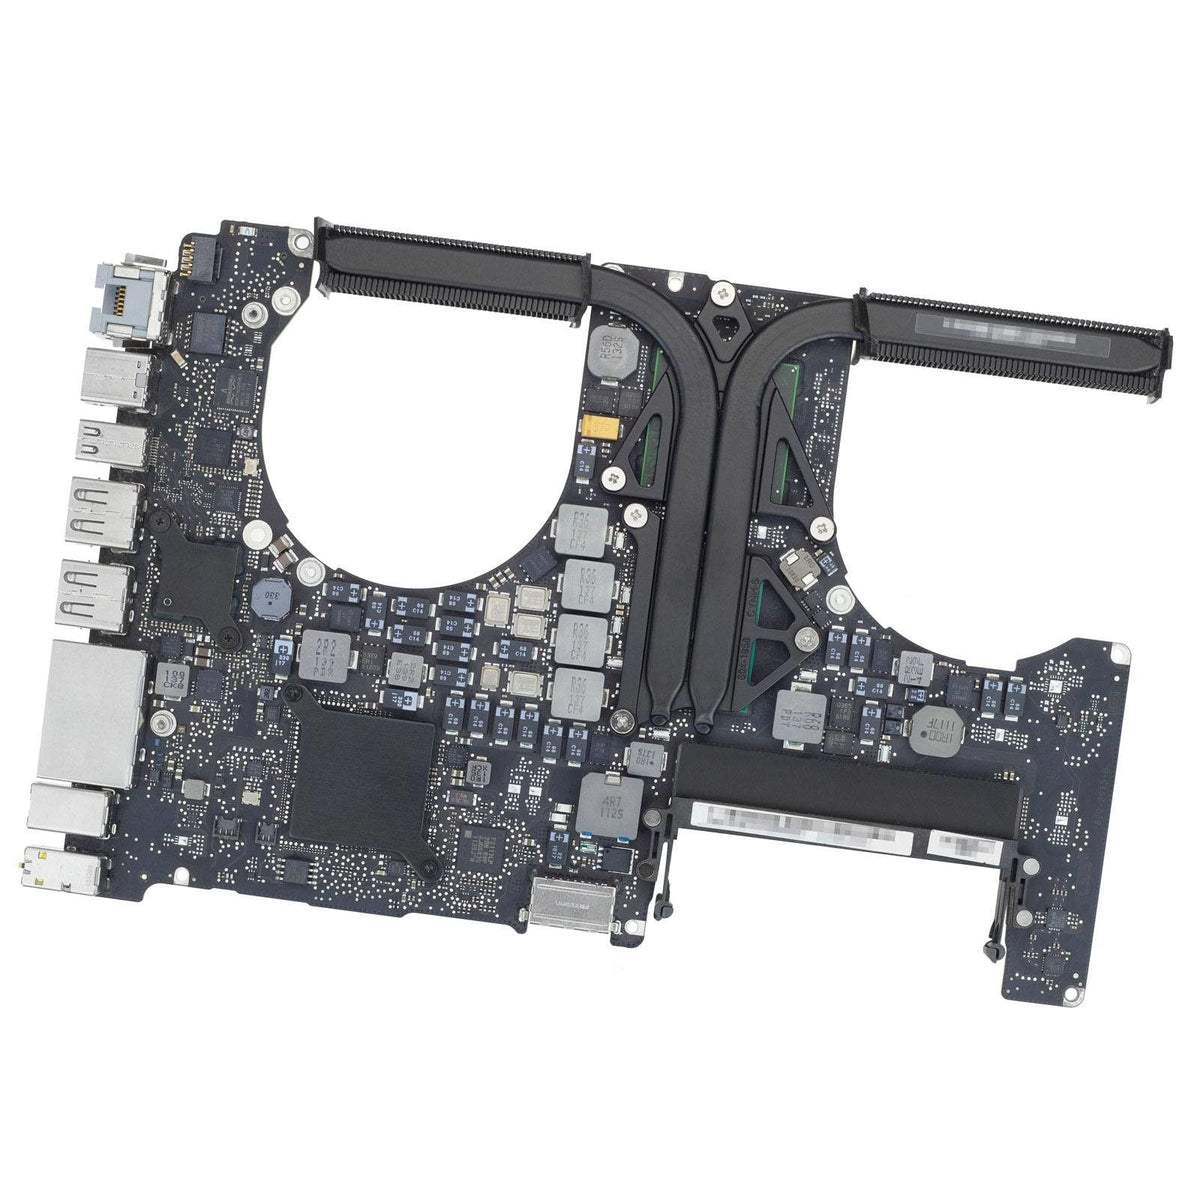 MOTHERBOARD FOR MACBOOK PRO 15" A1286 (EARLY 2011 - LATE 2011)